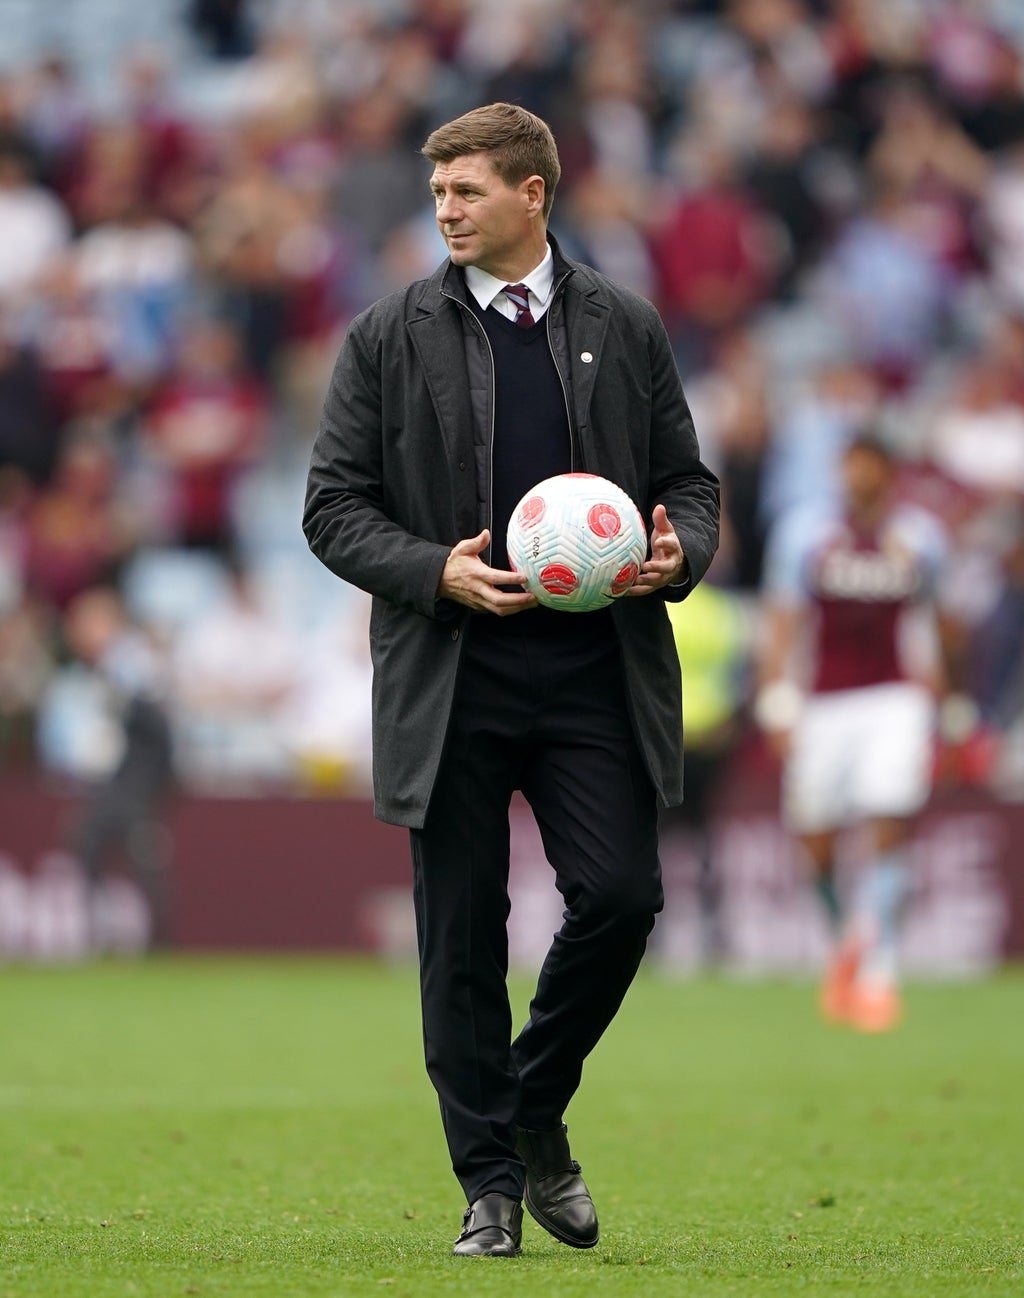 Steven Gerrard: I have to earn time and patience at Aston Villa